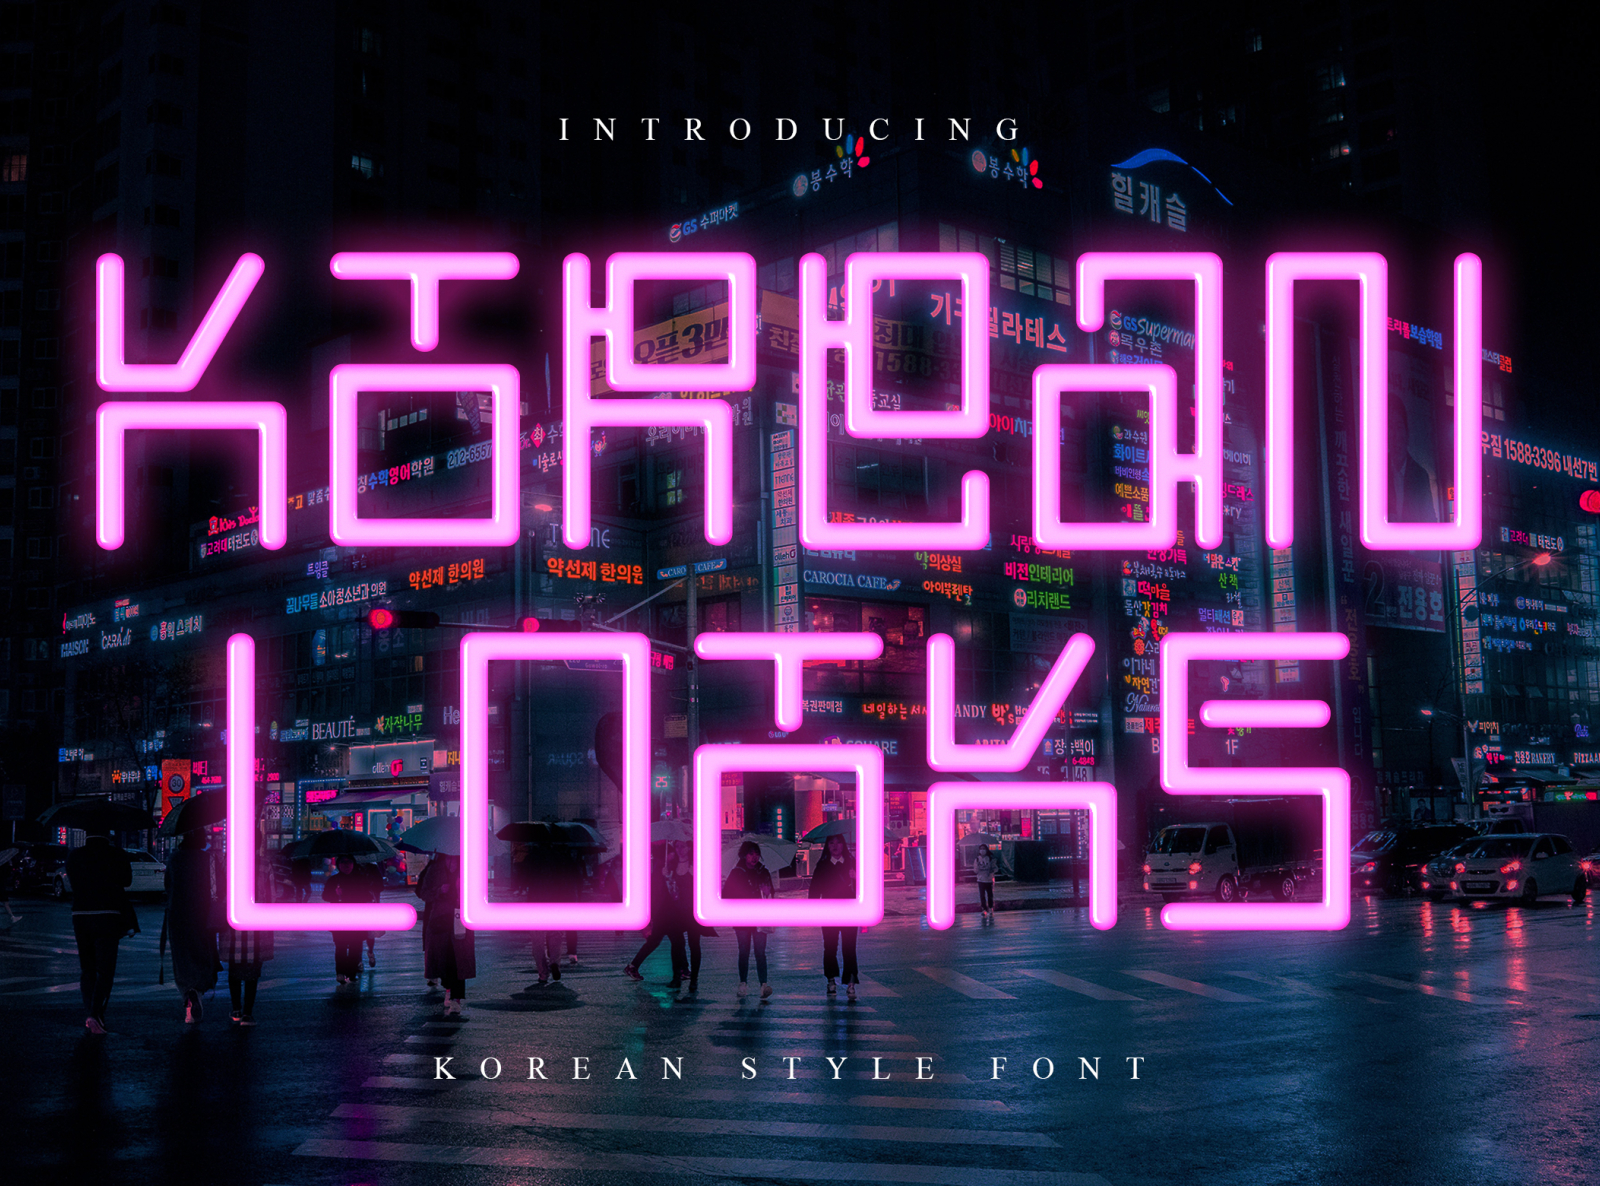 Download Free Korean Looks Korean Style Display Typeface By Abas Creative On Dribbble Fonts Typography